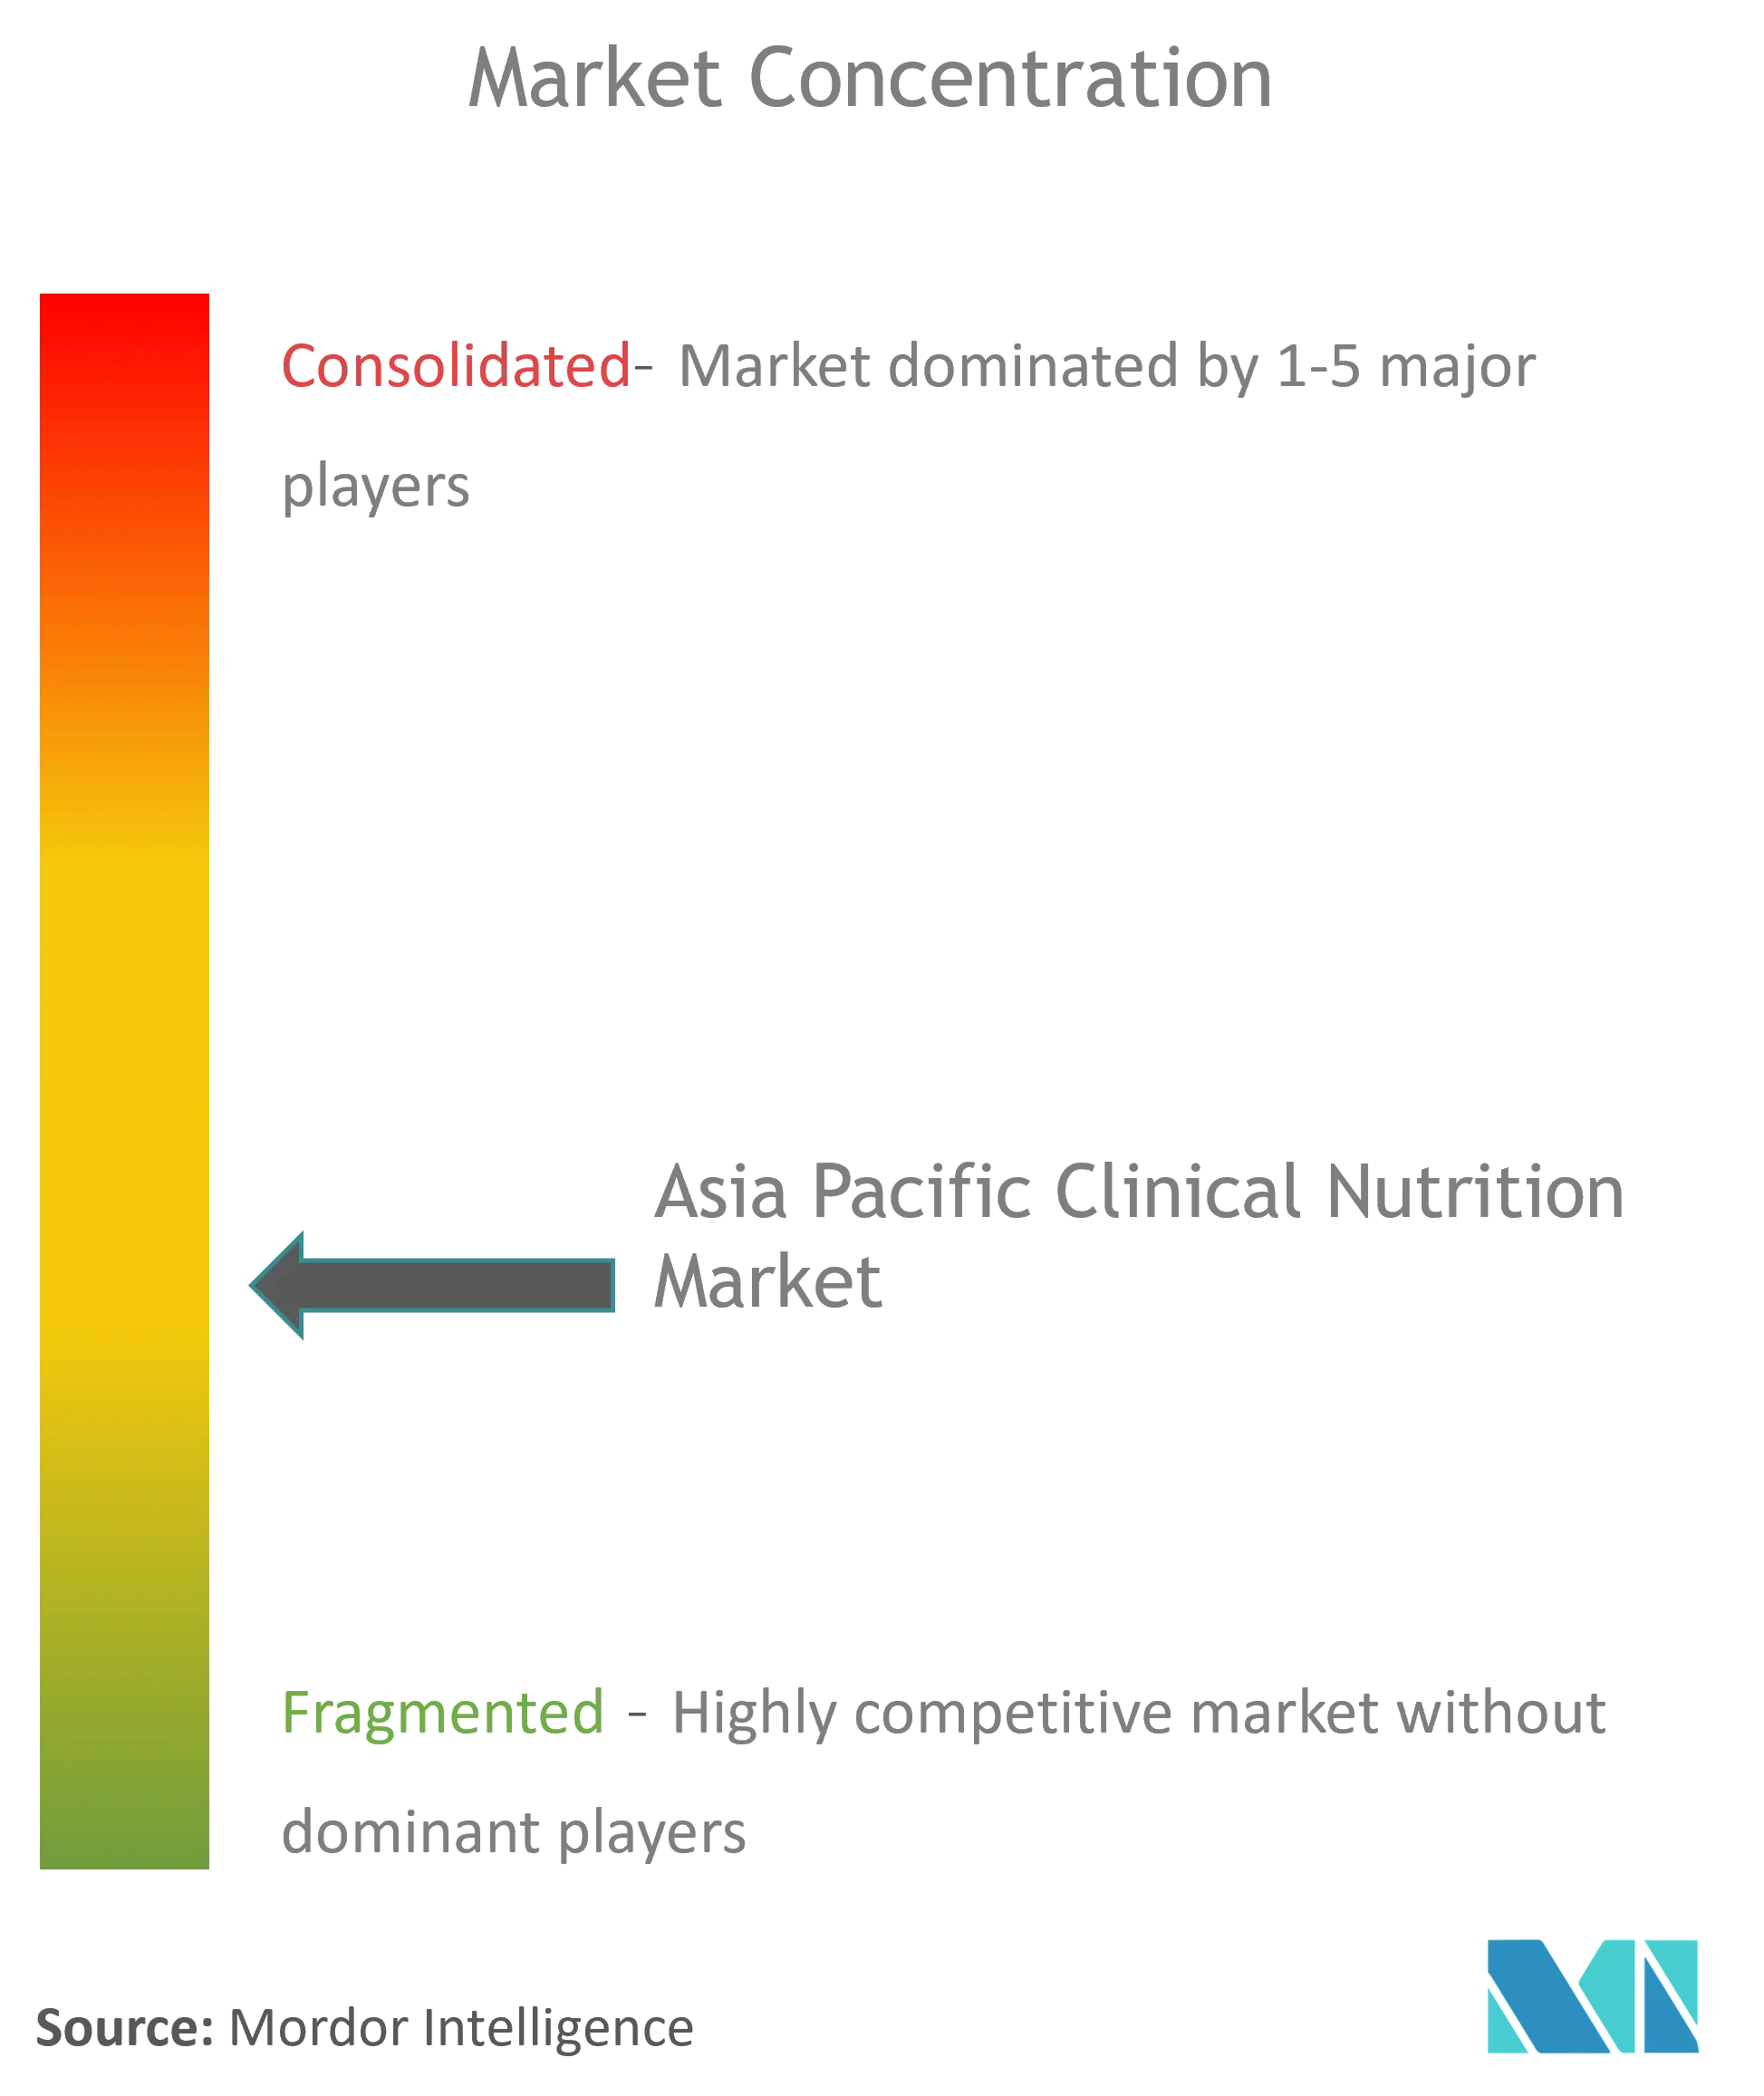 APAC Medical Clinical Nutrition Market Concentration